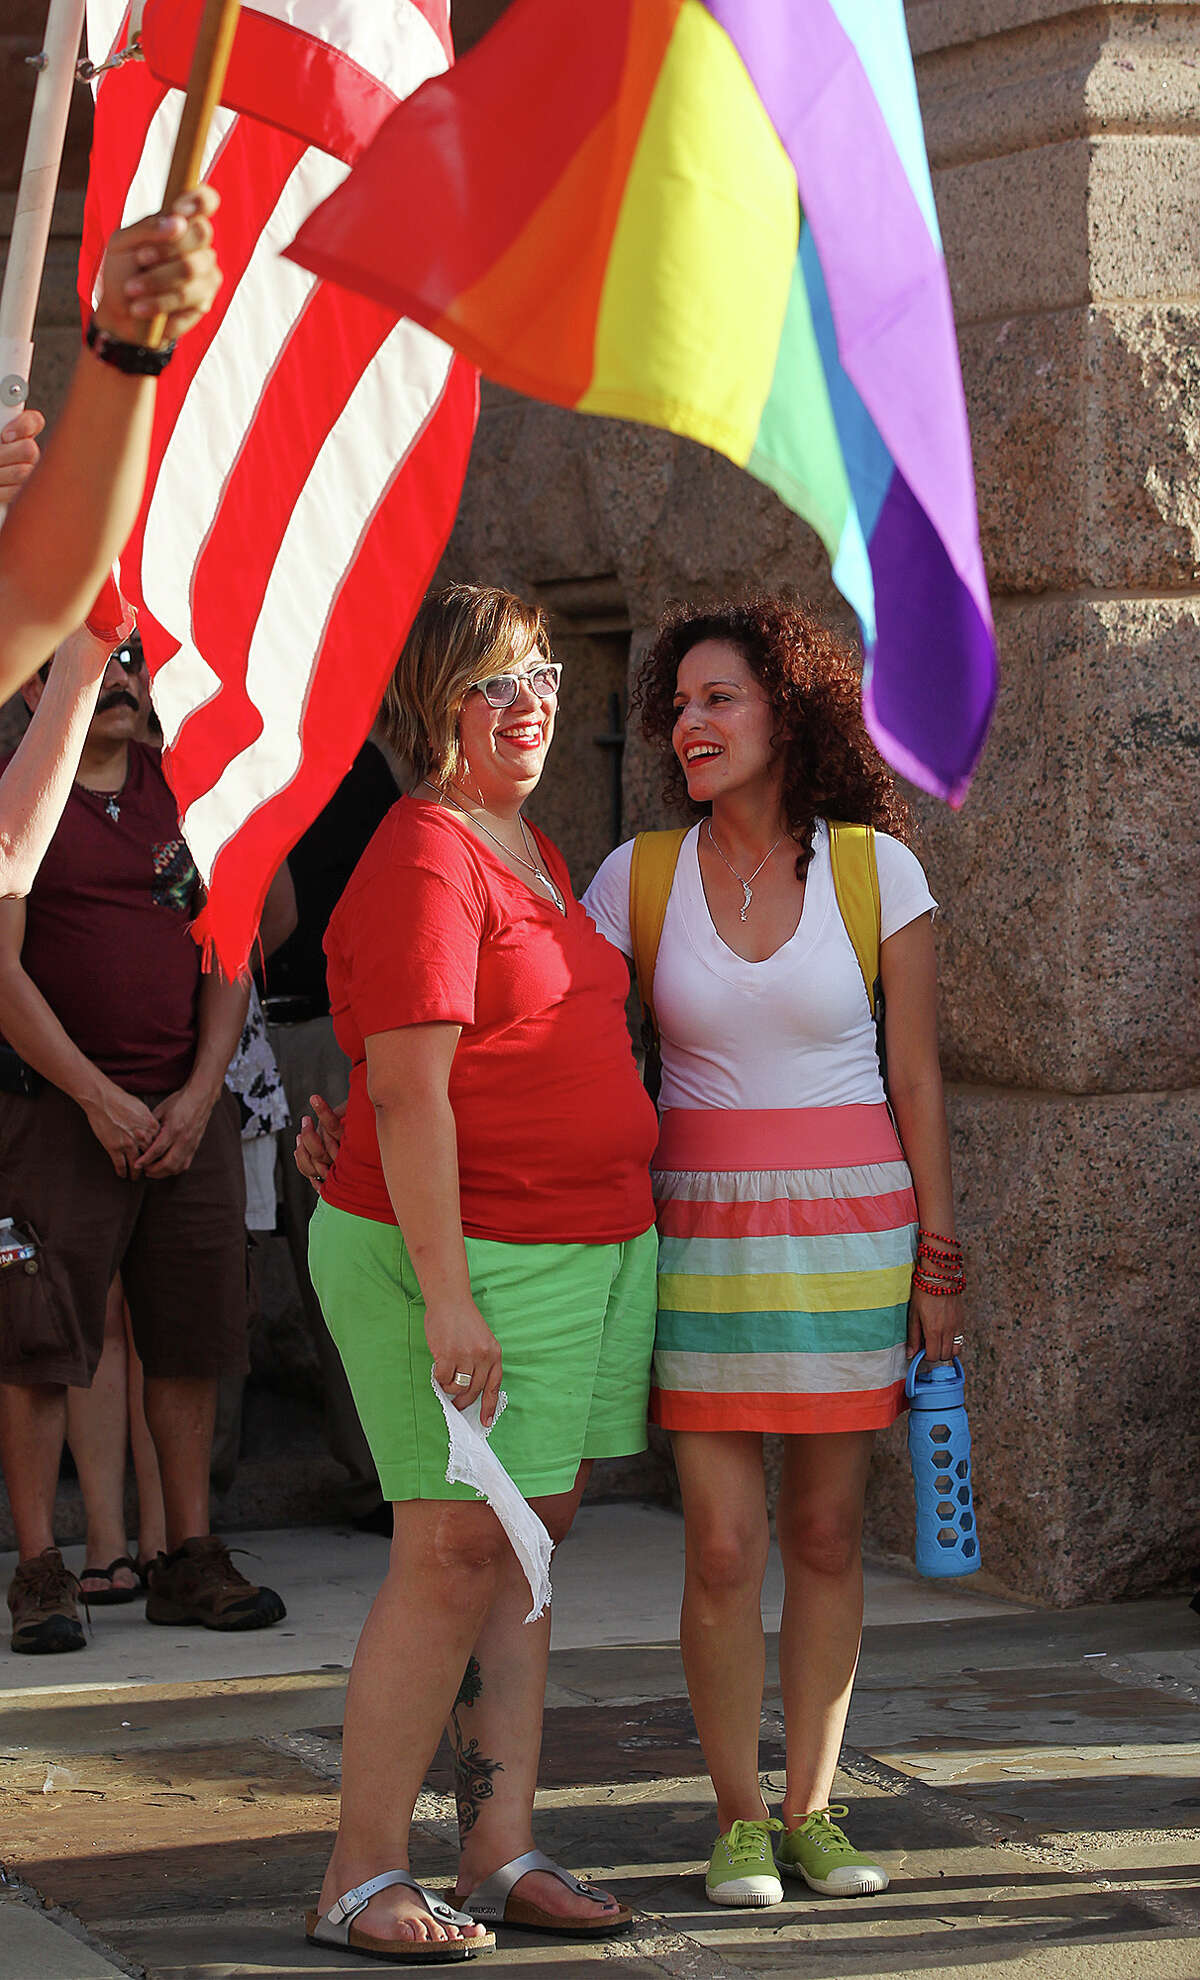 Anel Flores, left, and Erika Casasola gather with other supporters for "The Day of Decision" Rally in front of the Bexar County Courthouse, Wednesday, June 26, 2013. The rally was in celebration of the U.S. Supreme Court decision striking down the Defense of Marriage Act. It was organized by the Local Human Rights Campaign and GetEQUAL TX. Flores and Casasola have been together for eight years.